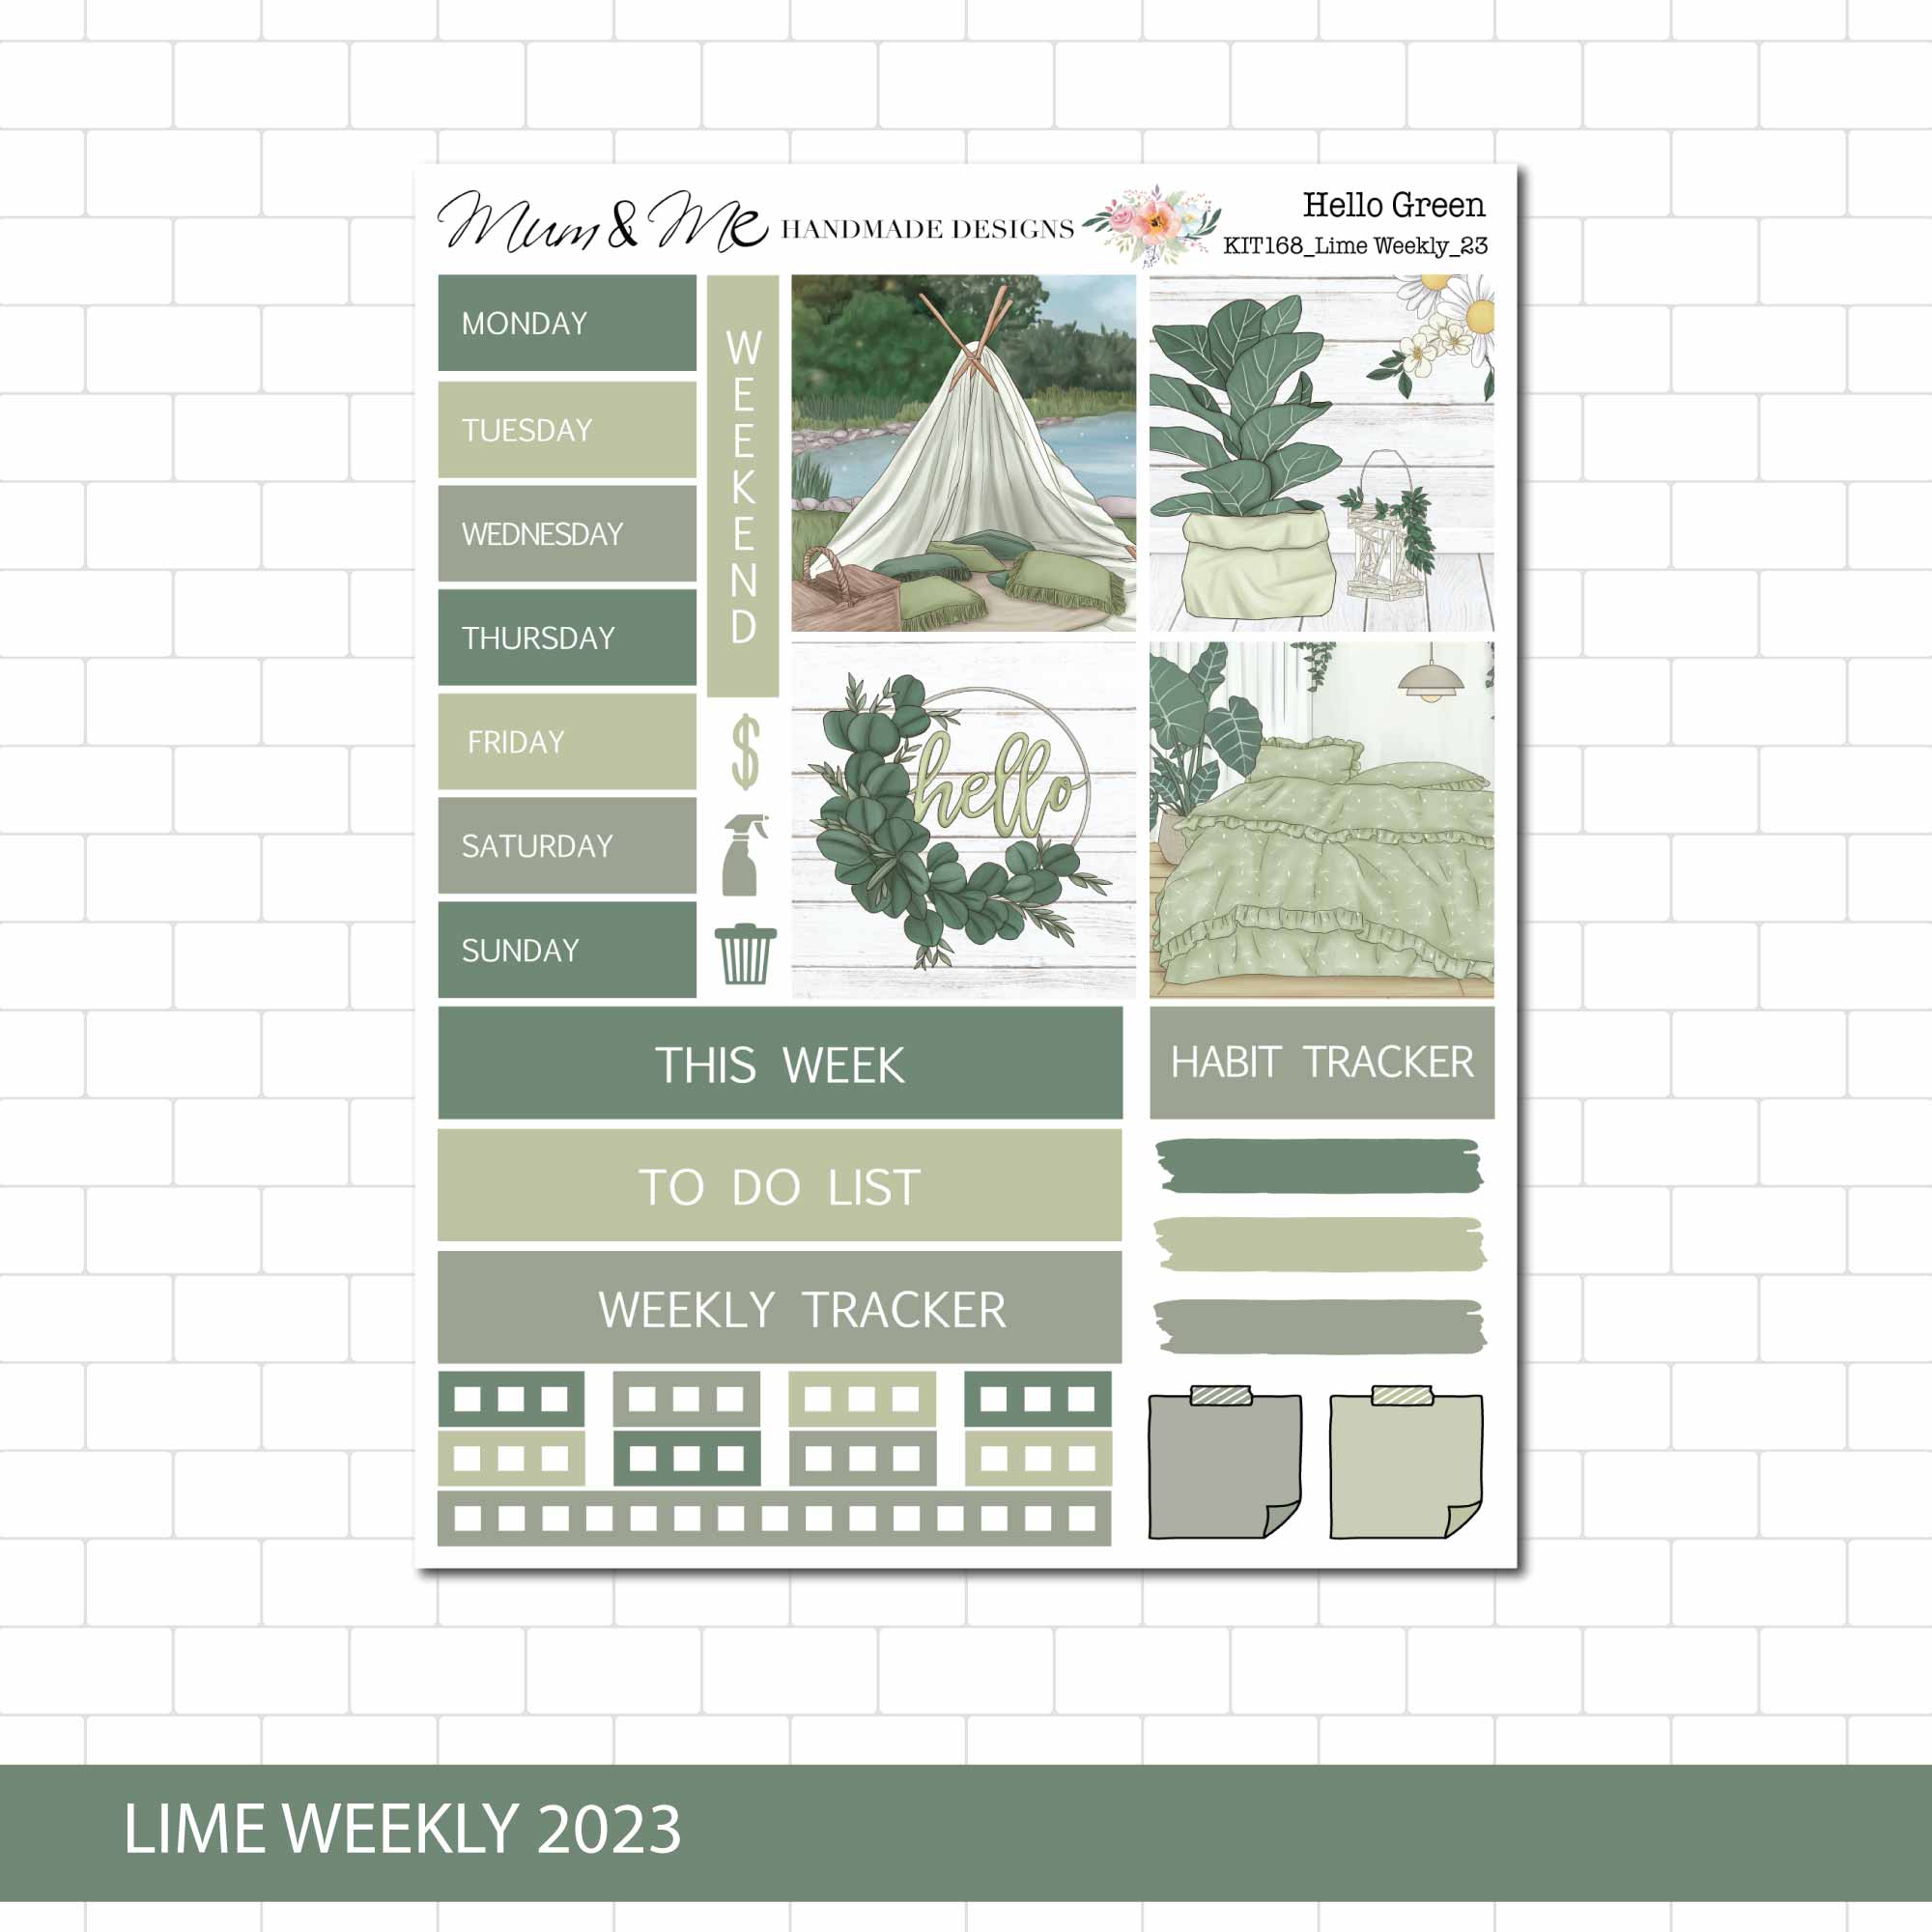 Lime Weekly: Hello Green